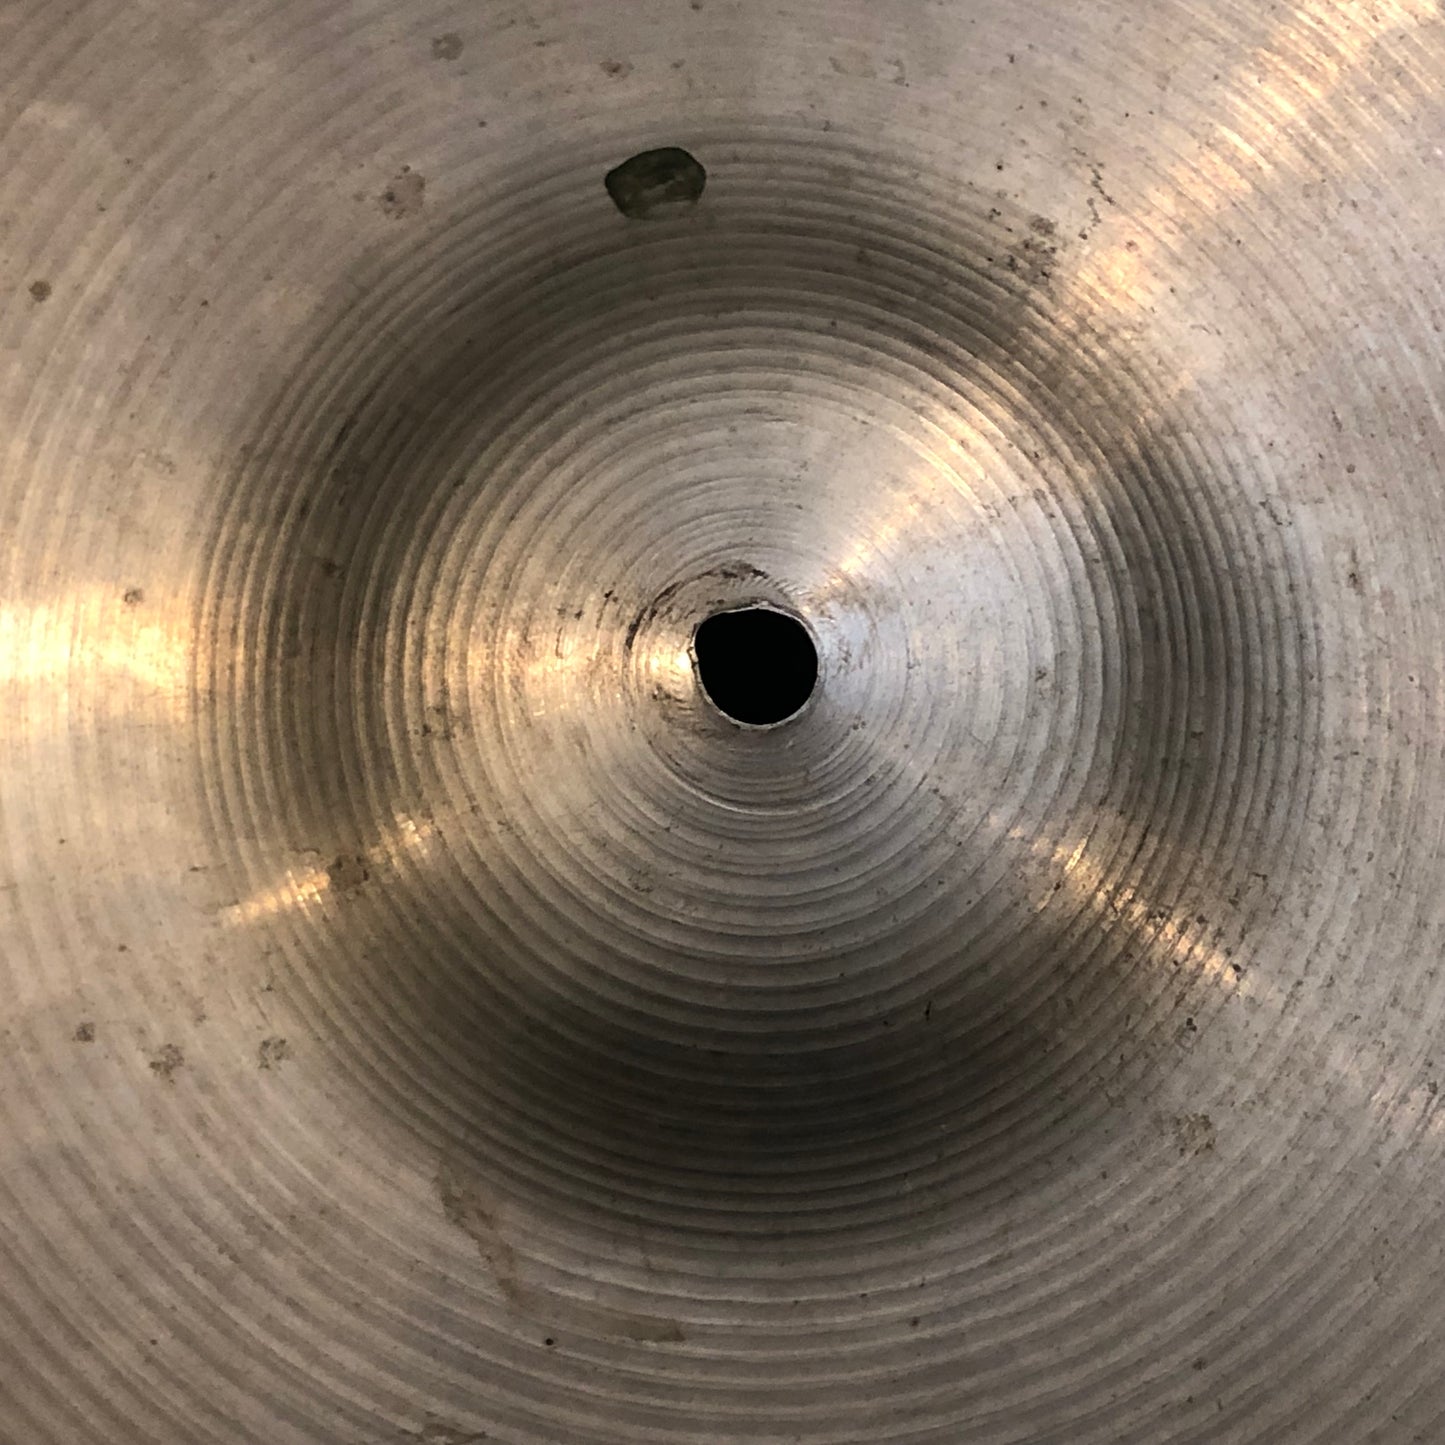 20" Paiste 1960s Ludwig Standard Ride Cymbal 1730g #625 *Video Demo*